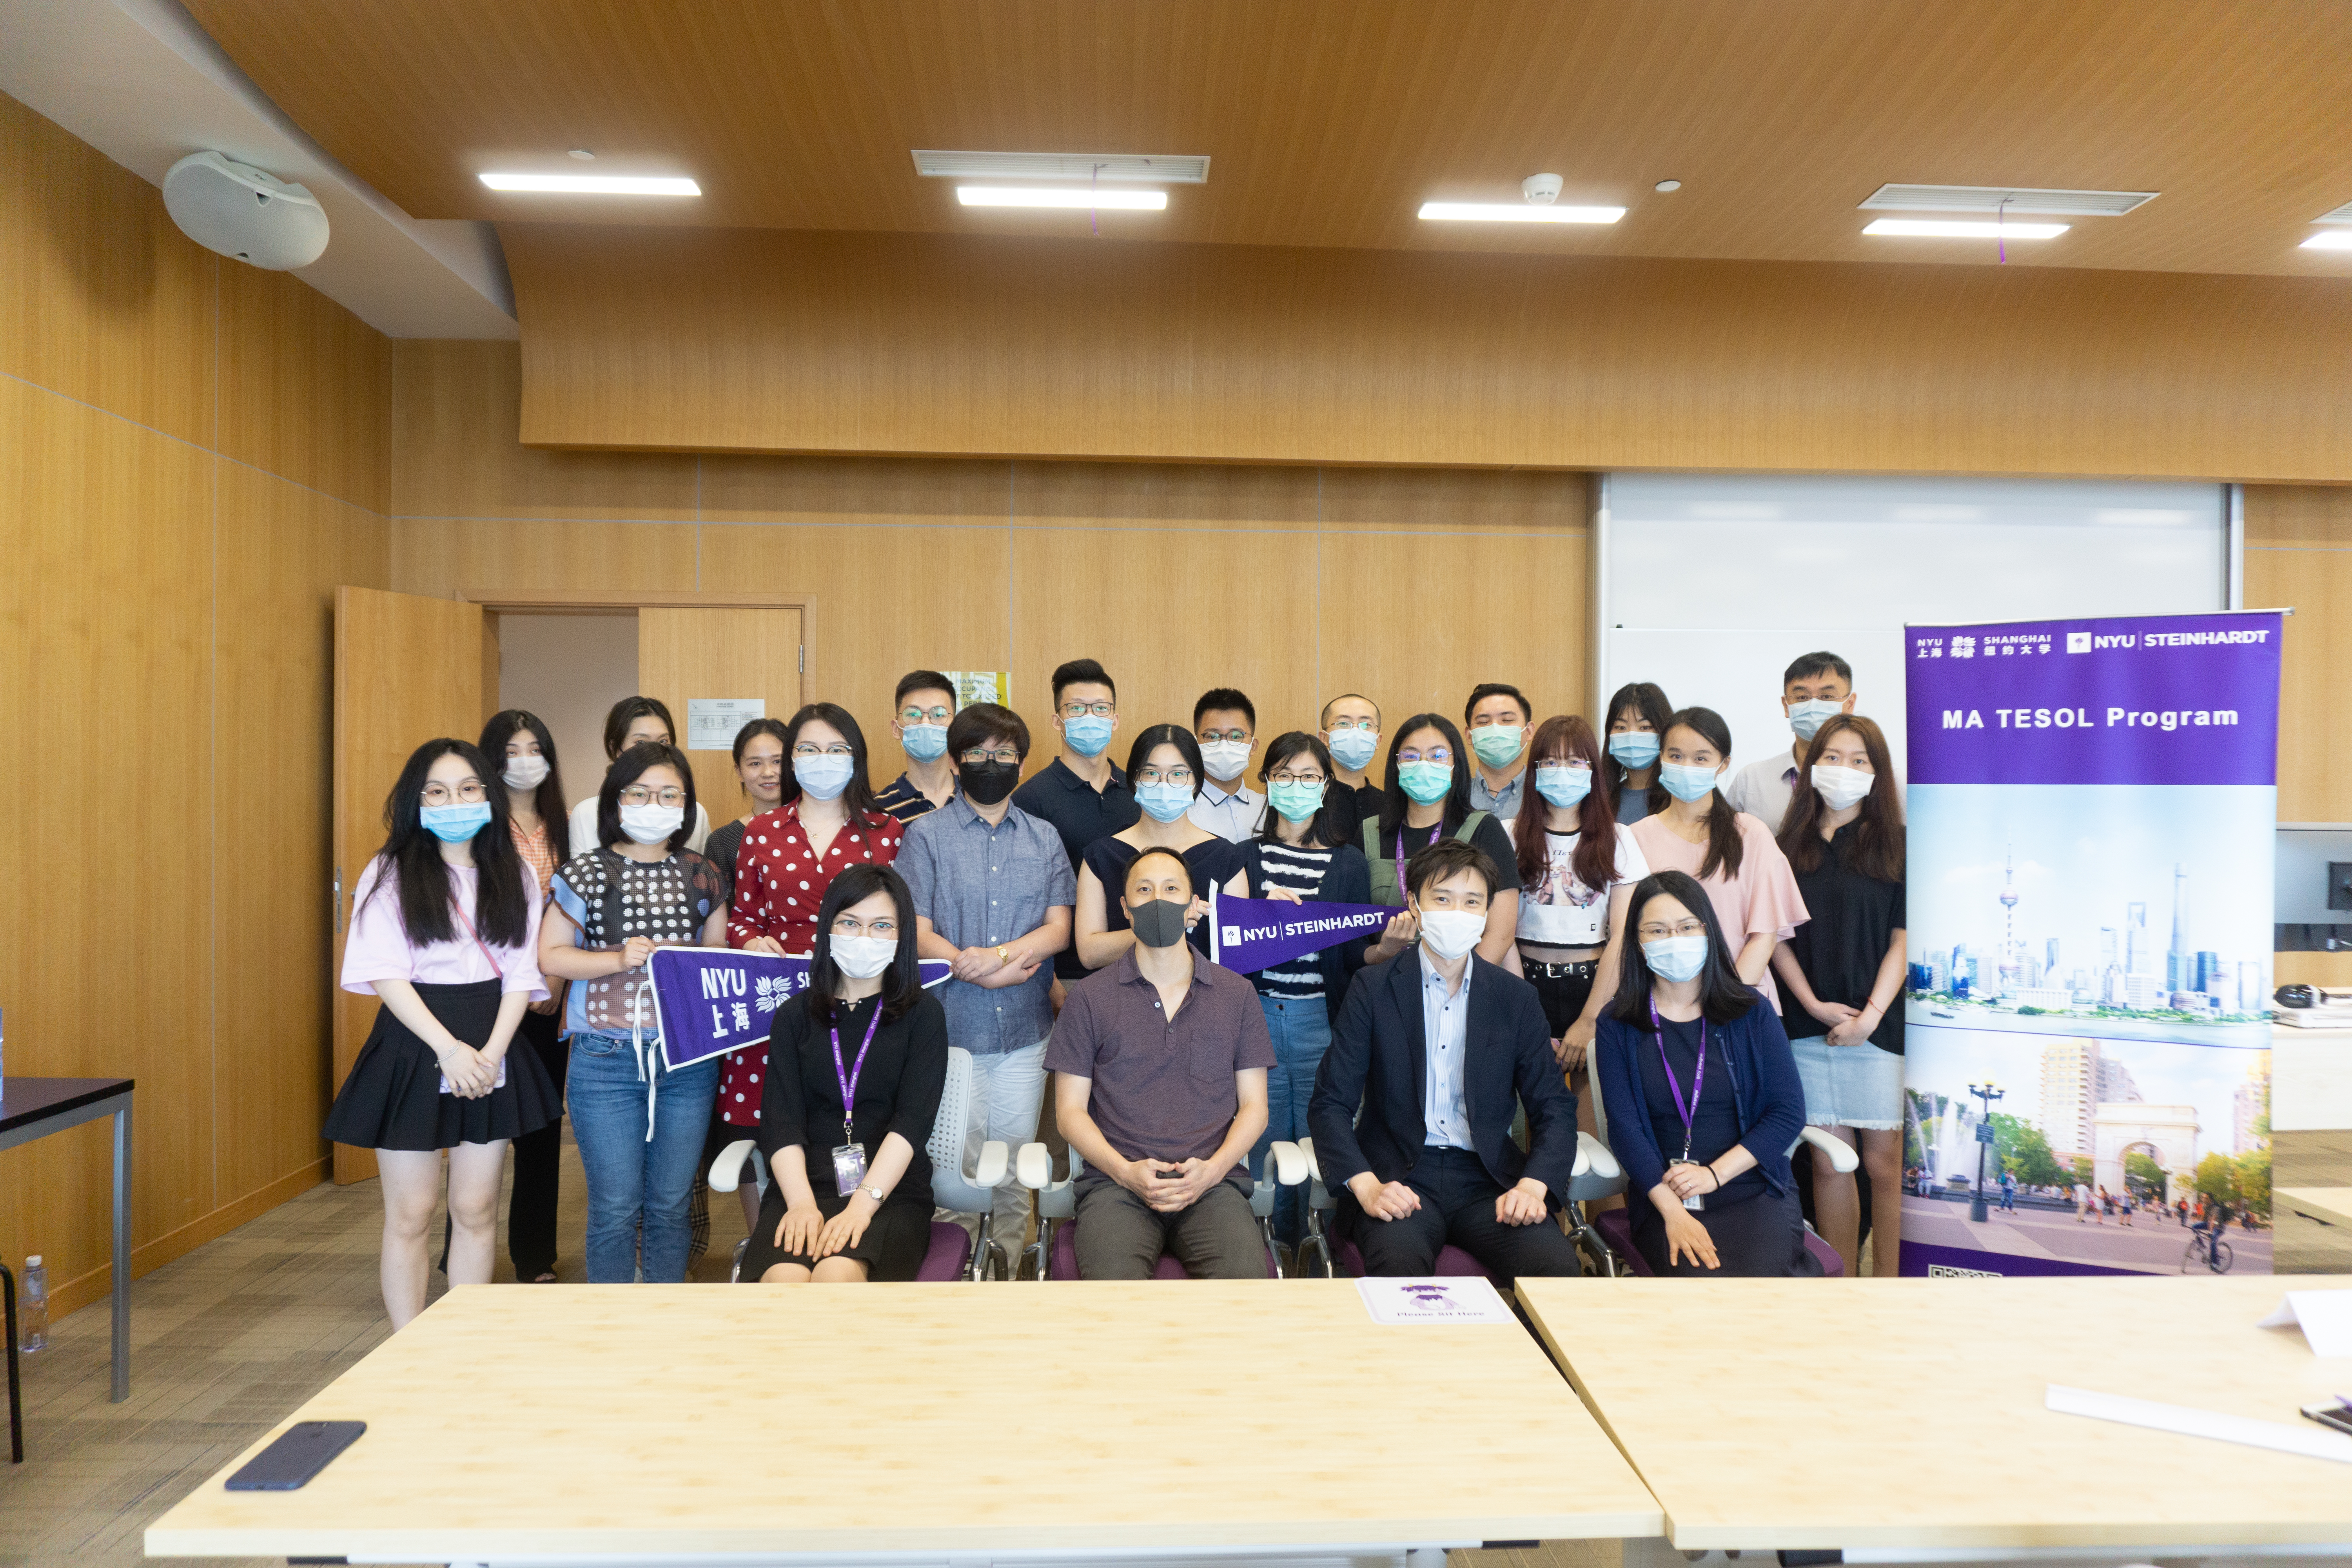 Students and professors pose for group photo wearing masks